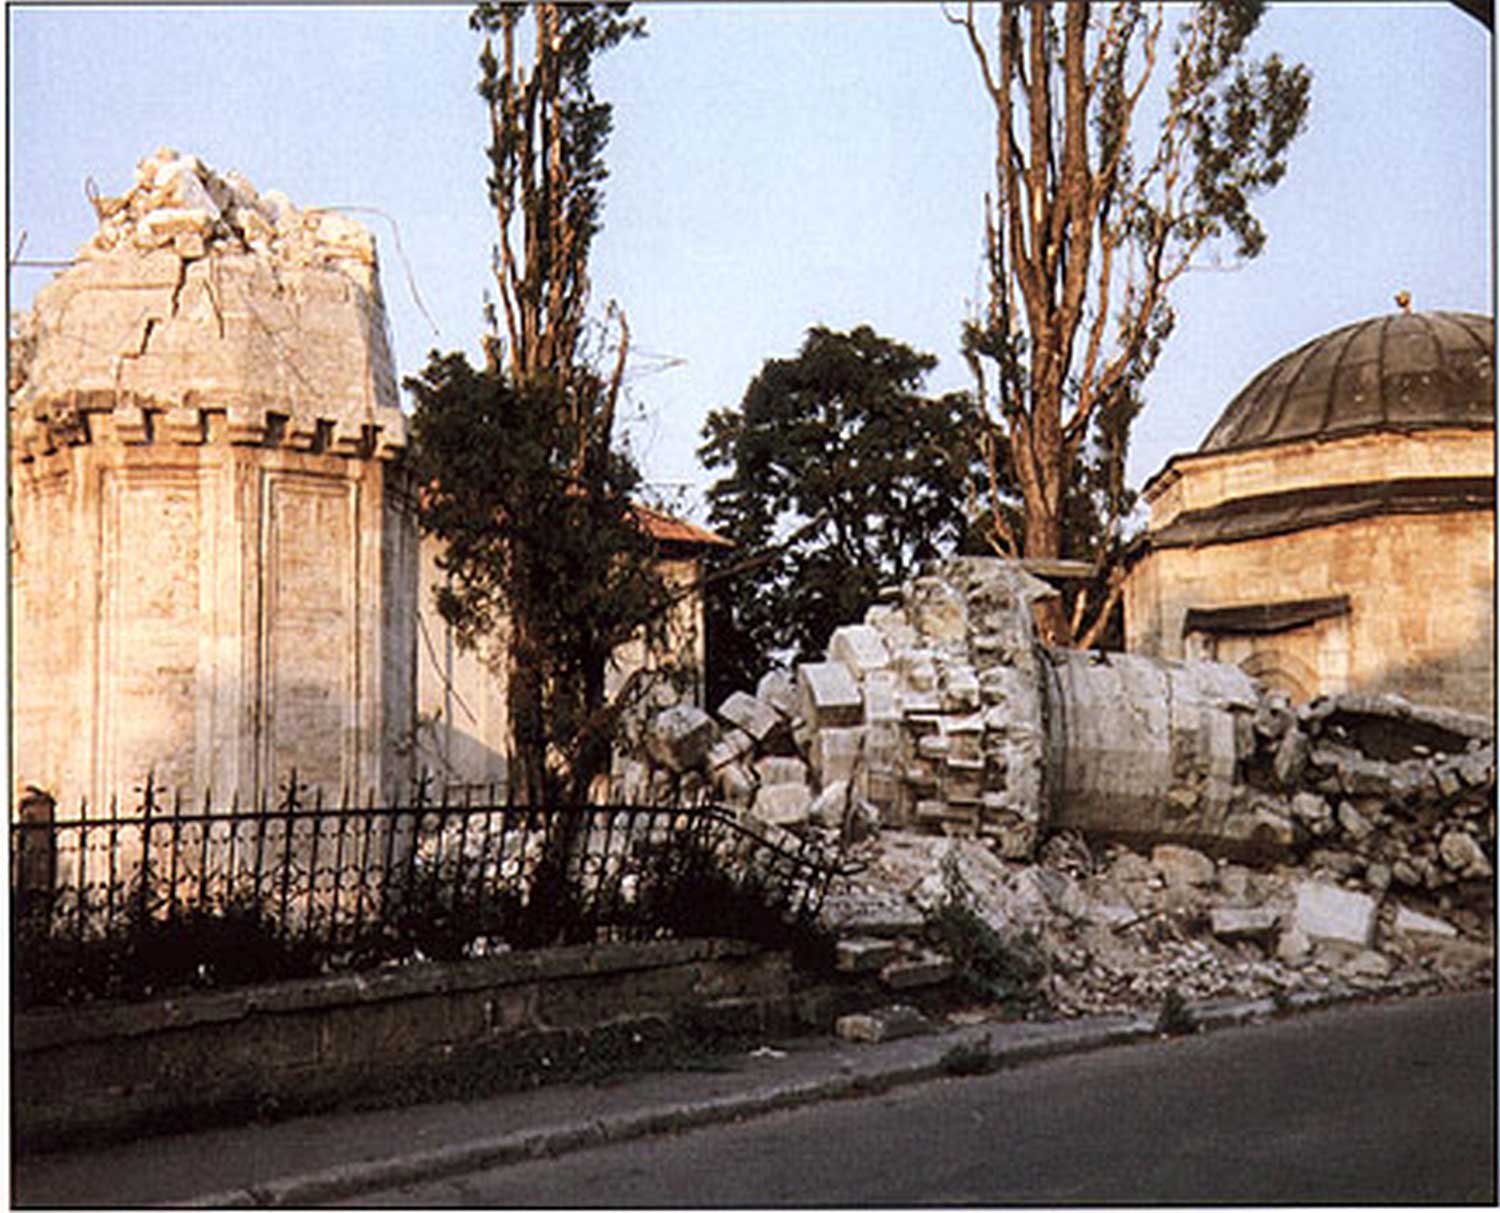 View of Ferhadija Mosque in the days after it was blown up, but before the ruins were cleared away.  At right is the mausoleum (turbe) of the mosque's founder, Ferhad Pasha Sokolovic.  